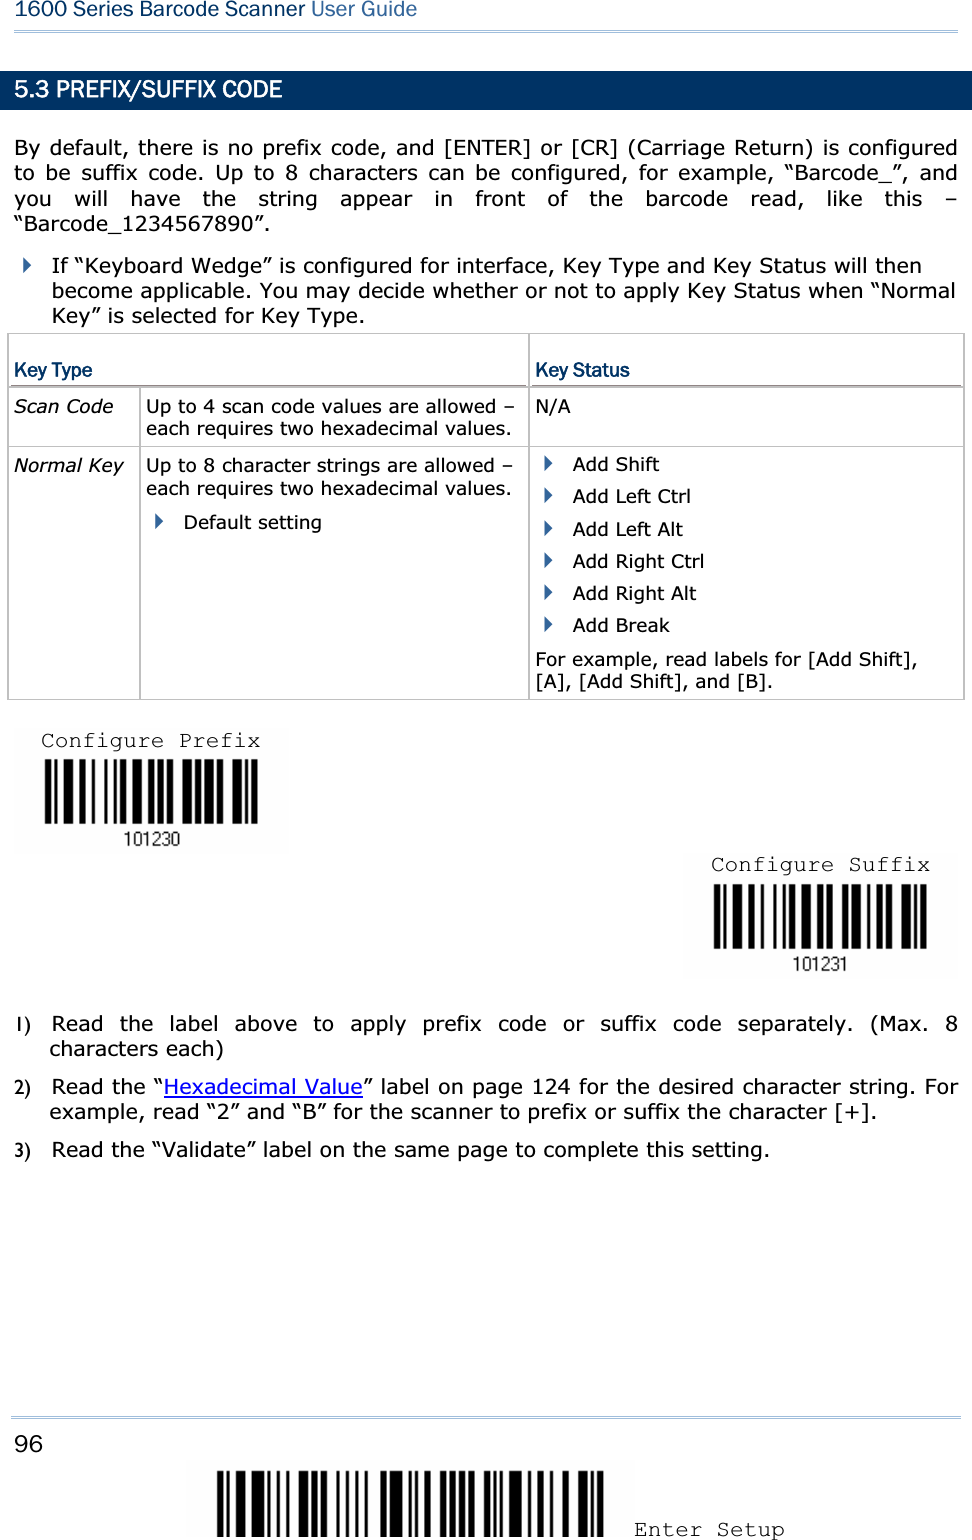 96Enter Setup 1600 Series Barcode Scanner User Guide5.3 PREFIX/SUFFIX CODE By default, there is no prefix code, and [ENTER] or [CR] (Carriage Return) is configured to be suffix code. Up to 8 characters can be configured, for example, “Barcode_”, and you will have the string appear in front of the barcode read, like this – “Barcode_1234567890”.If “Keyboard Wedge” is configured for interface, Key Type and Key Status will then become applicable. You may decide whether or not to apply Key Status when “Normal Key” is selected for Key Type. Key Type  Key Status Scan Code    Up to 4 scan code values are allowed – each requires two hexadecimal values.N/ANormal Key  Up to 8 character strings are allowed – each requires two hexadecimal values.Default setting Add Shift Add Left Ctrl Add Left Alt Add Right Ctrl Add Right Alt Add Break For example, read labels for [Add Shift], [A], [Add Shift], and [B]. 1) Read the label above to apply prefix code or suffix code separately. (Max. 8 characters each) 2) Read the “Hexadecimal Value” label on page 124 for the desired character string. For example, read “2” and “B” for the scanner to prefix or suffix the character [+]. 3) Read the “Validate” label on the same page to complete this setting. Configure PrefixConfigure Suffix